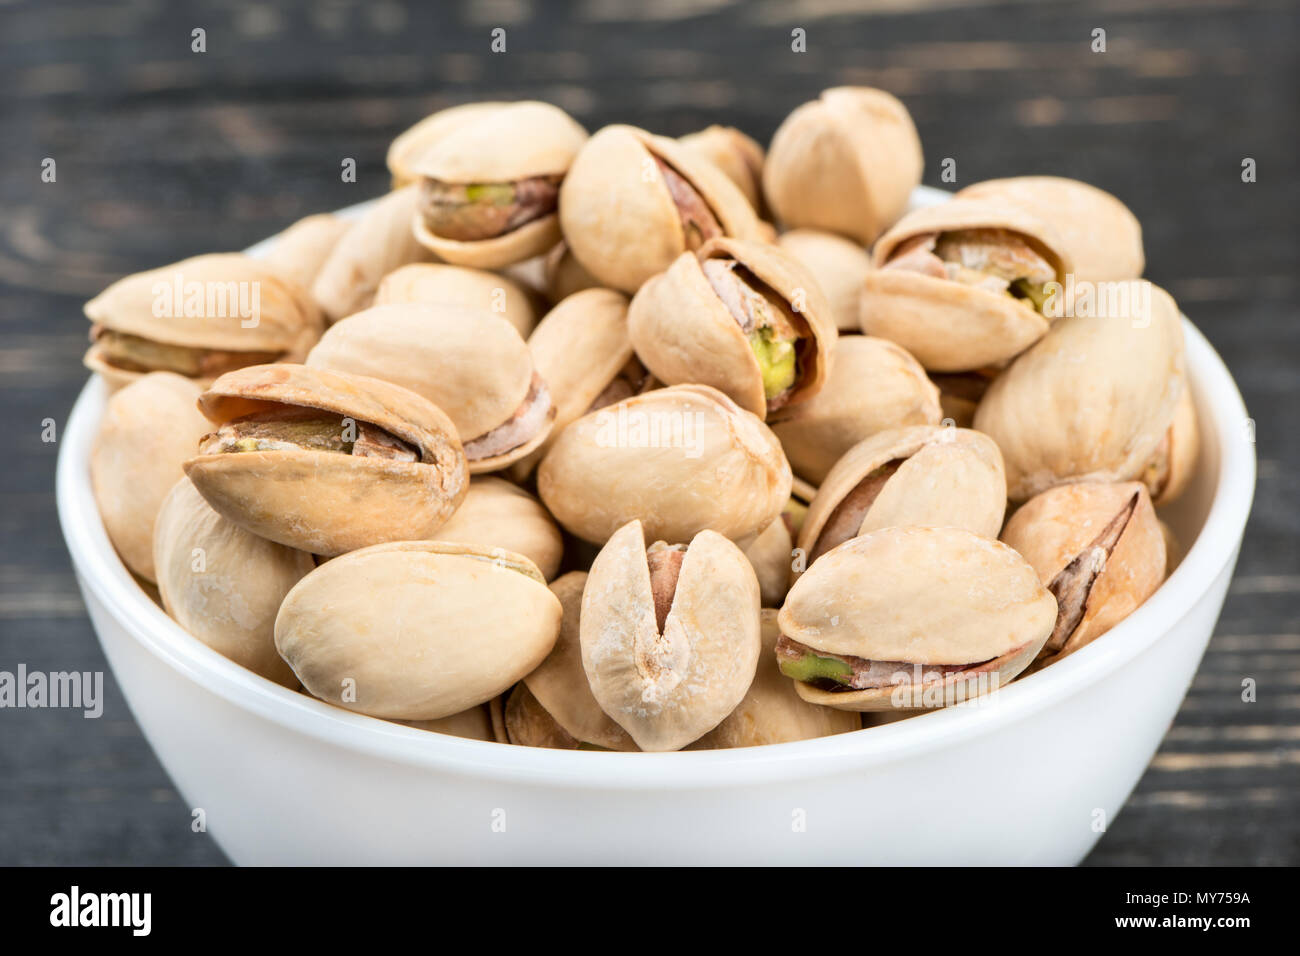 Ceramic bowl filled with pistachio nuts closeup Stock Photo